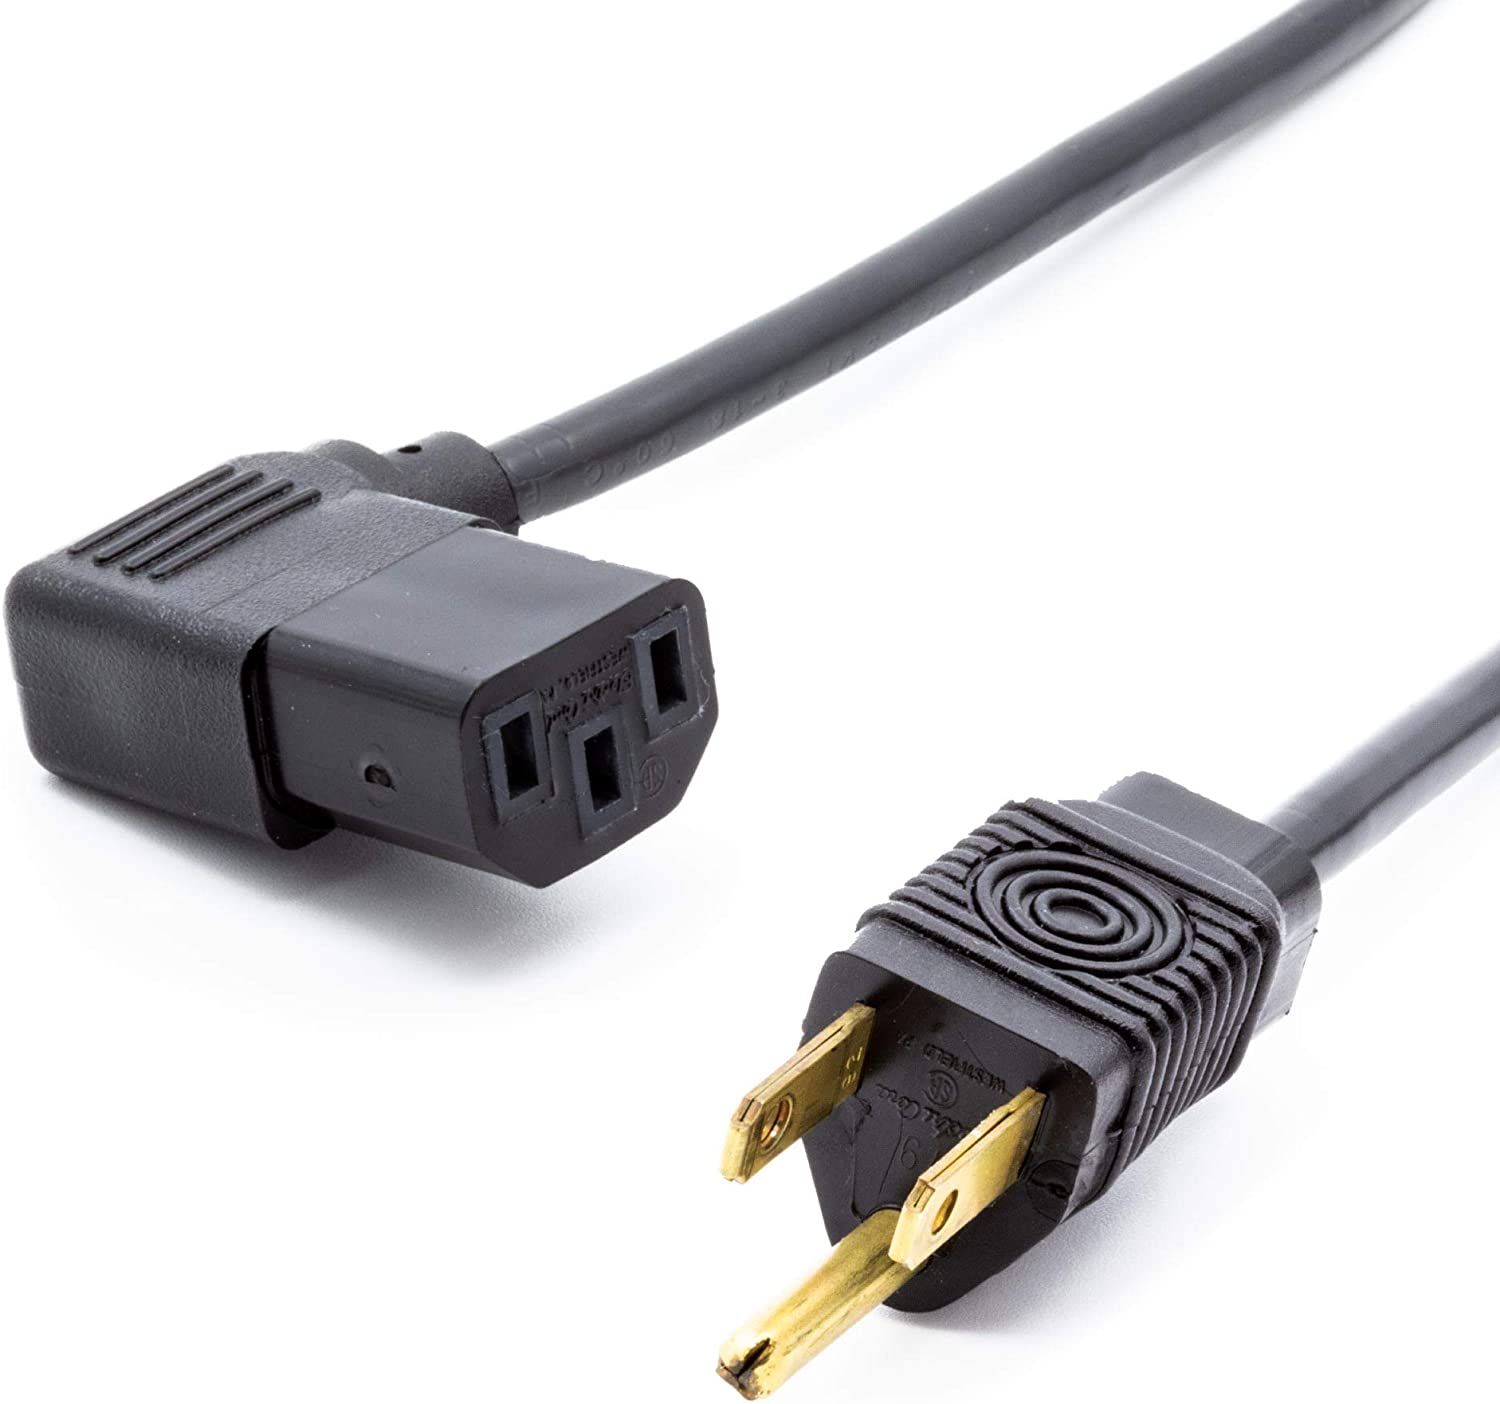 UL Approved 6 Feet Universal Computer Monitor Power Cord, Right Angle C13 Power Cable  - 5 Pack!